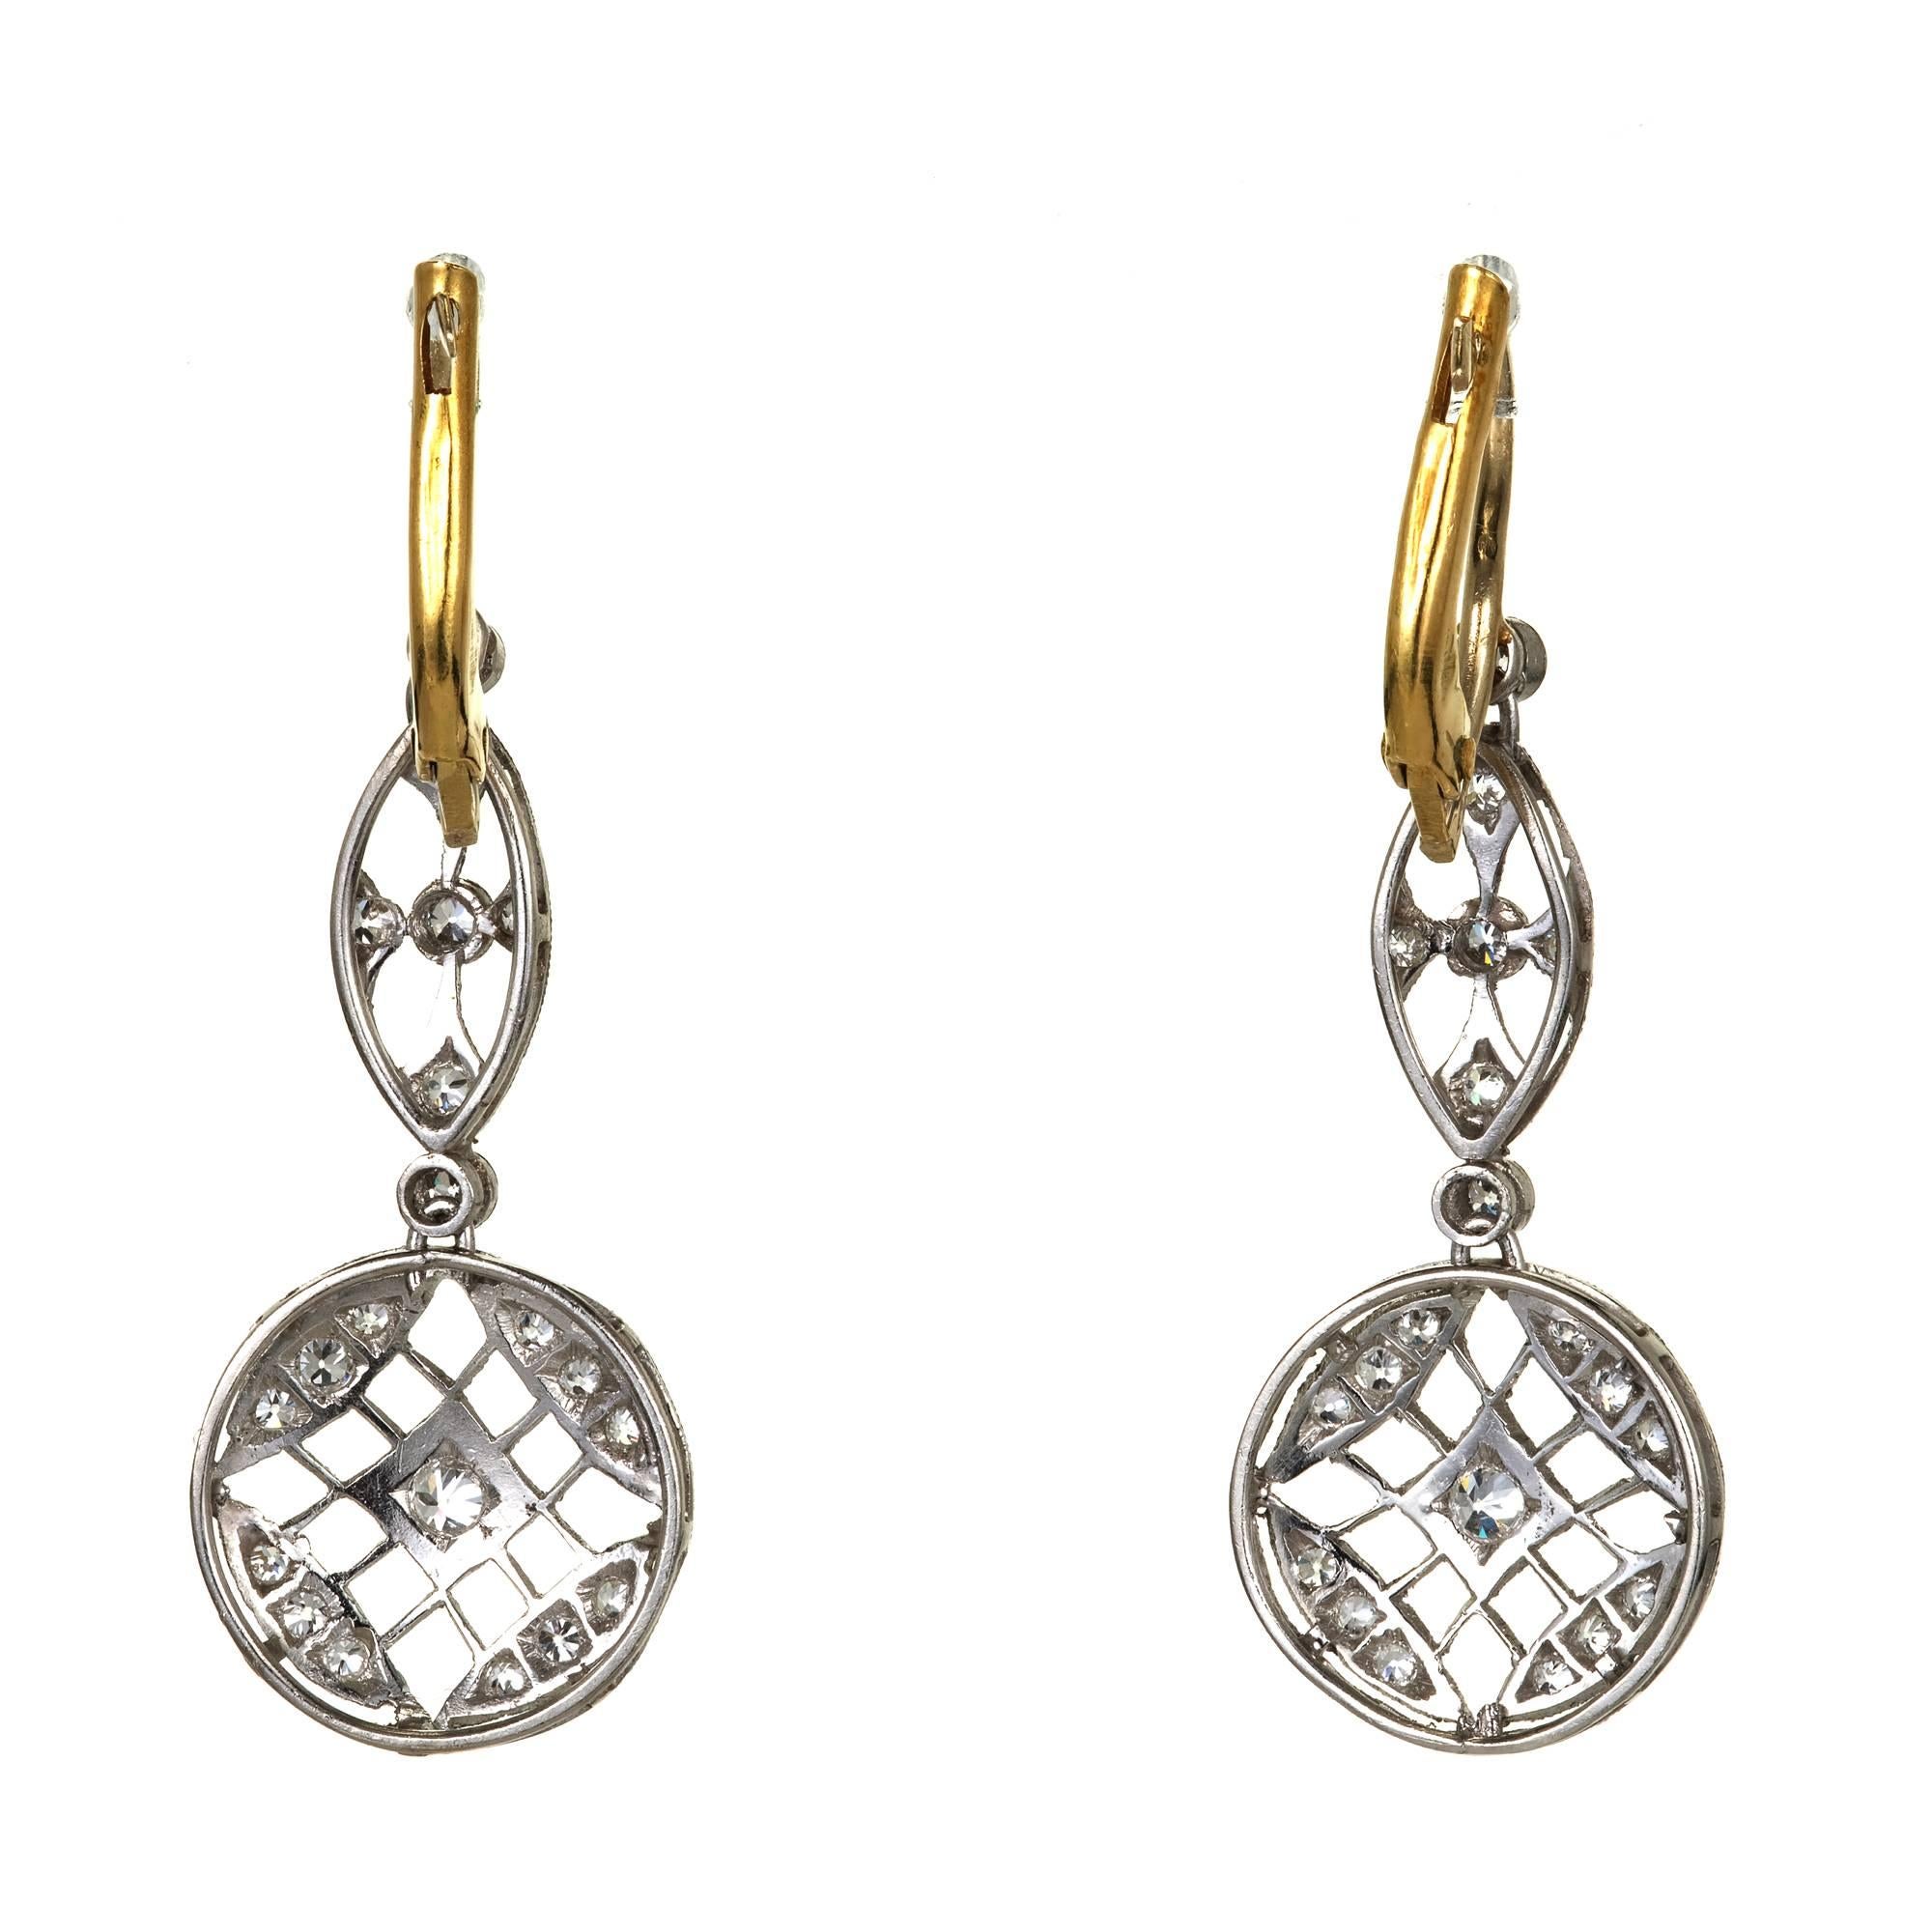 Handmade Art Deco diamond platinum dangle earrings with 14k yellow gold European style wires on top. Piercing and bead setting. Circa 1920.

44 round diamonds approx. total weight .50cts, old European cut, G, VS
Platinum
14k Yellow Gold
Tested 14k /